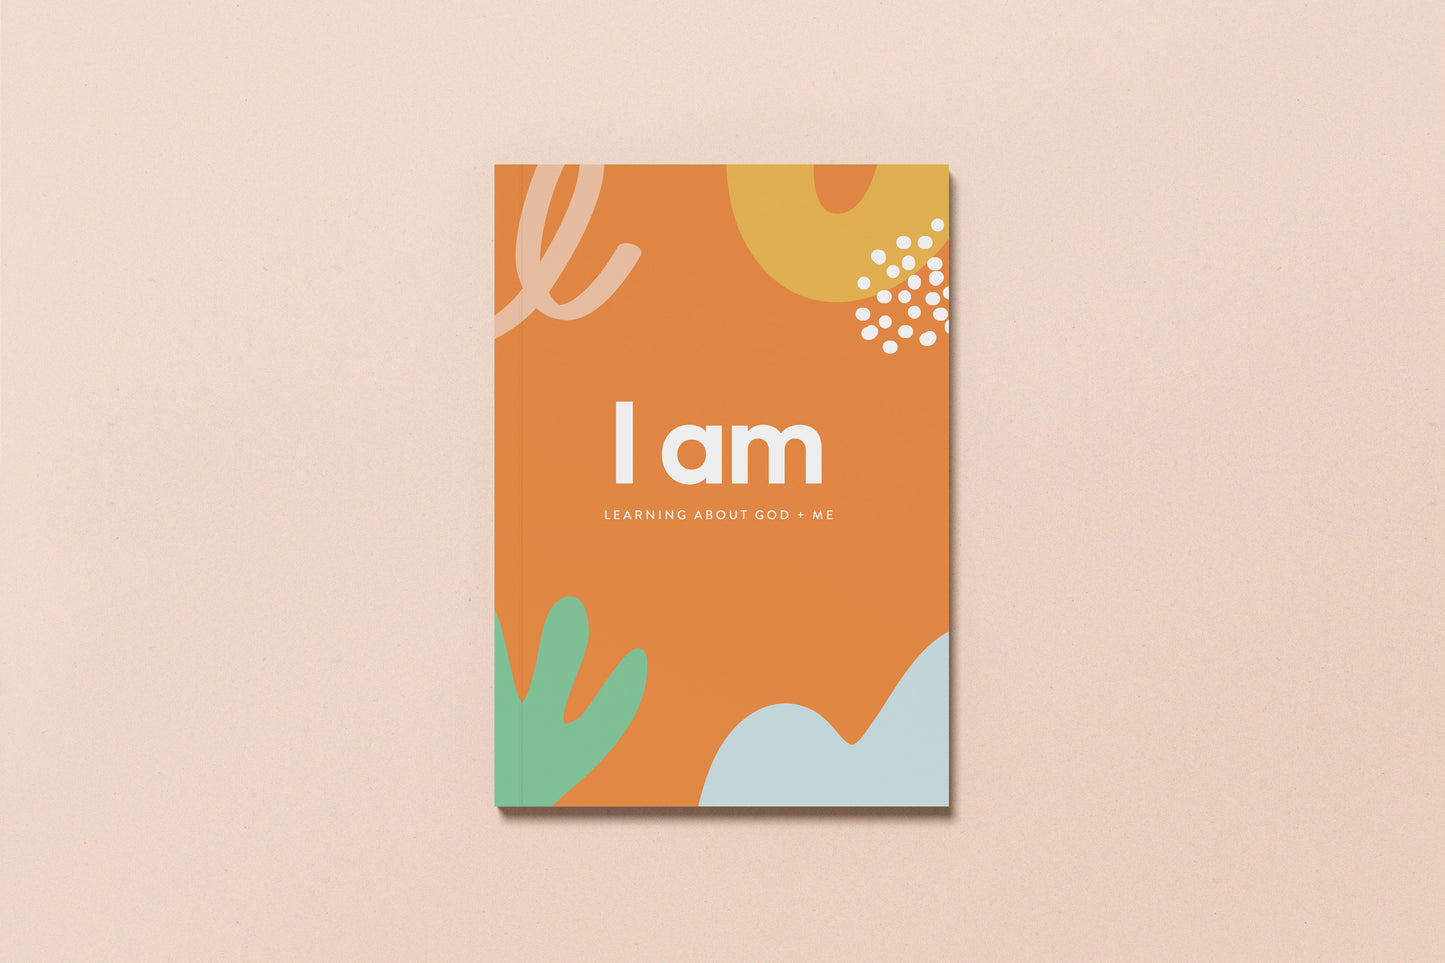 I Am: Learning About God + Me